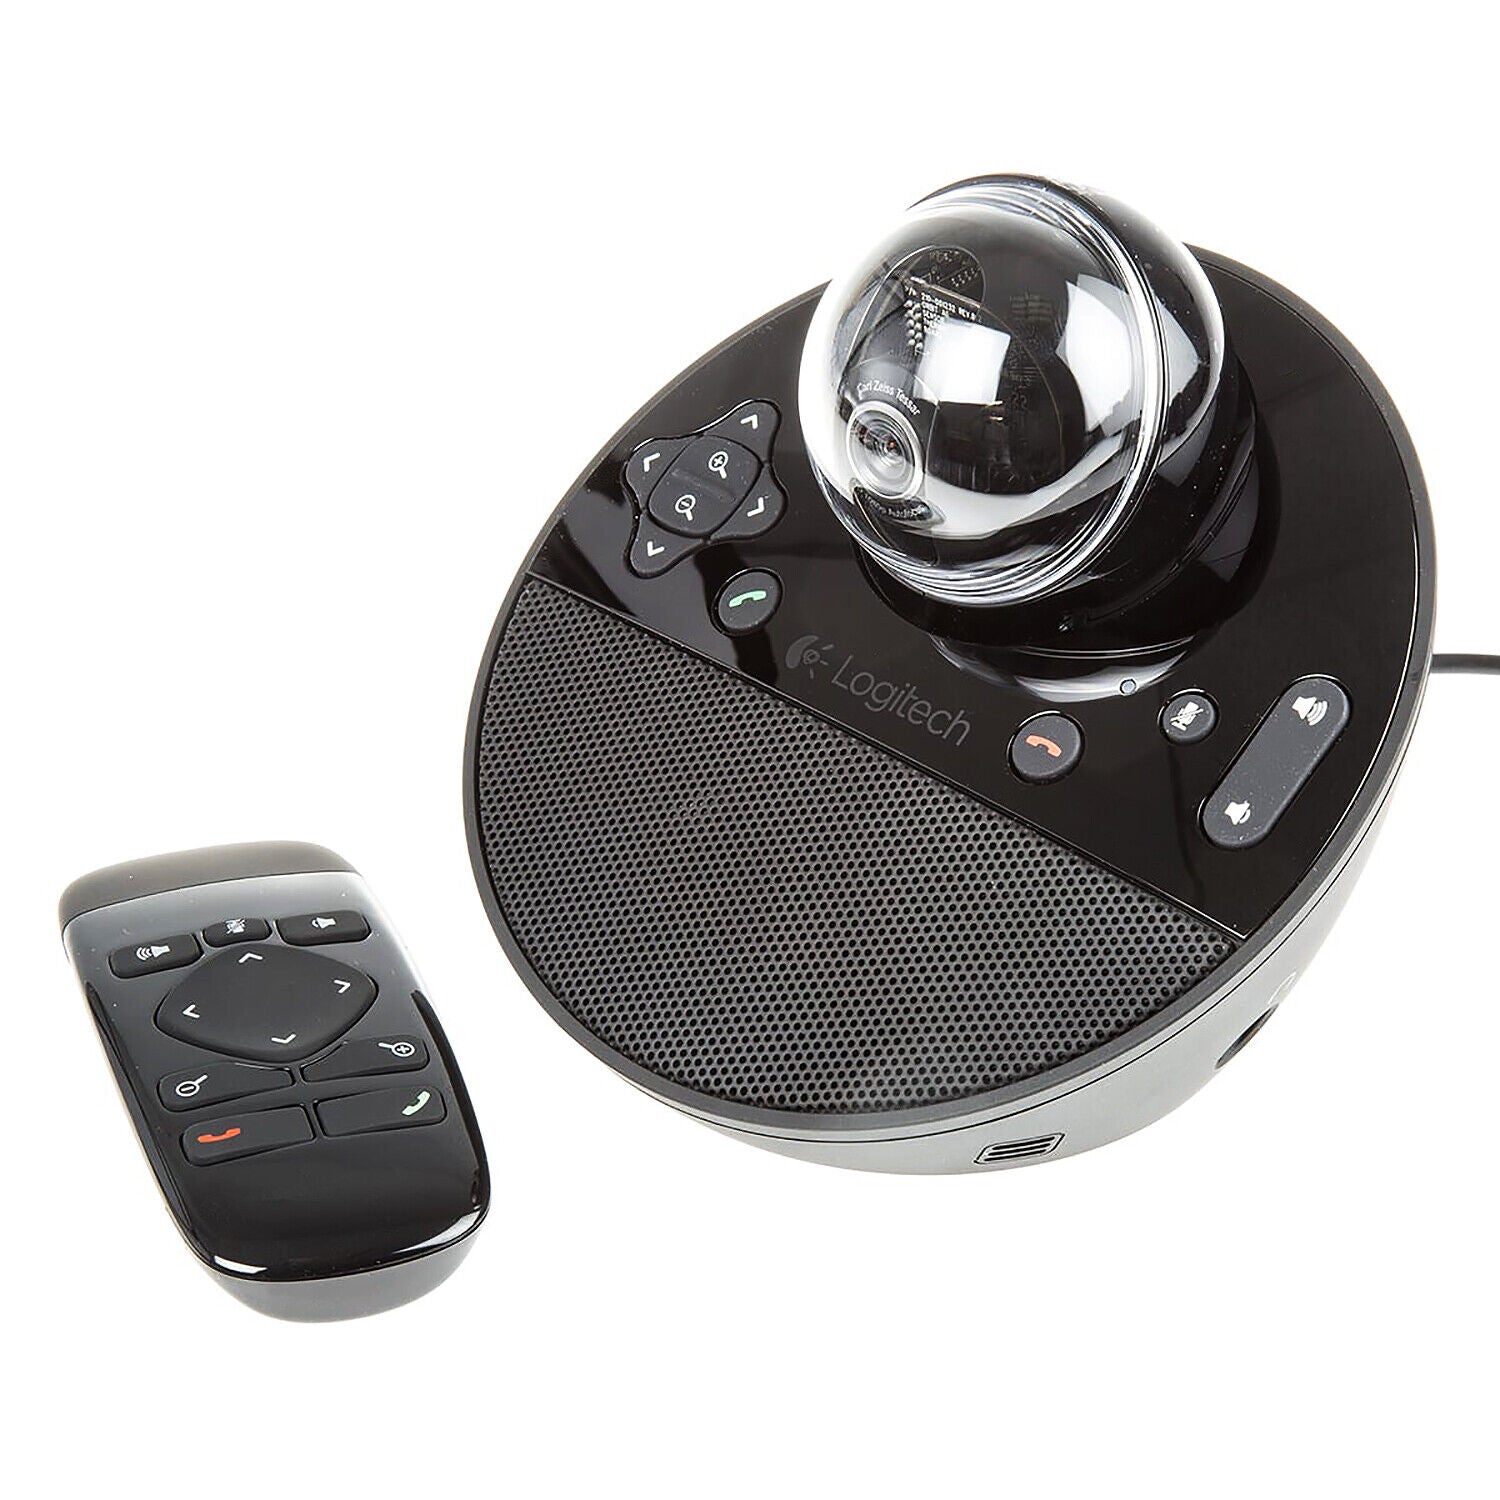 Logitech Conference Camera BCC950 HD Video Webcam with Speakerphone